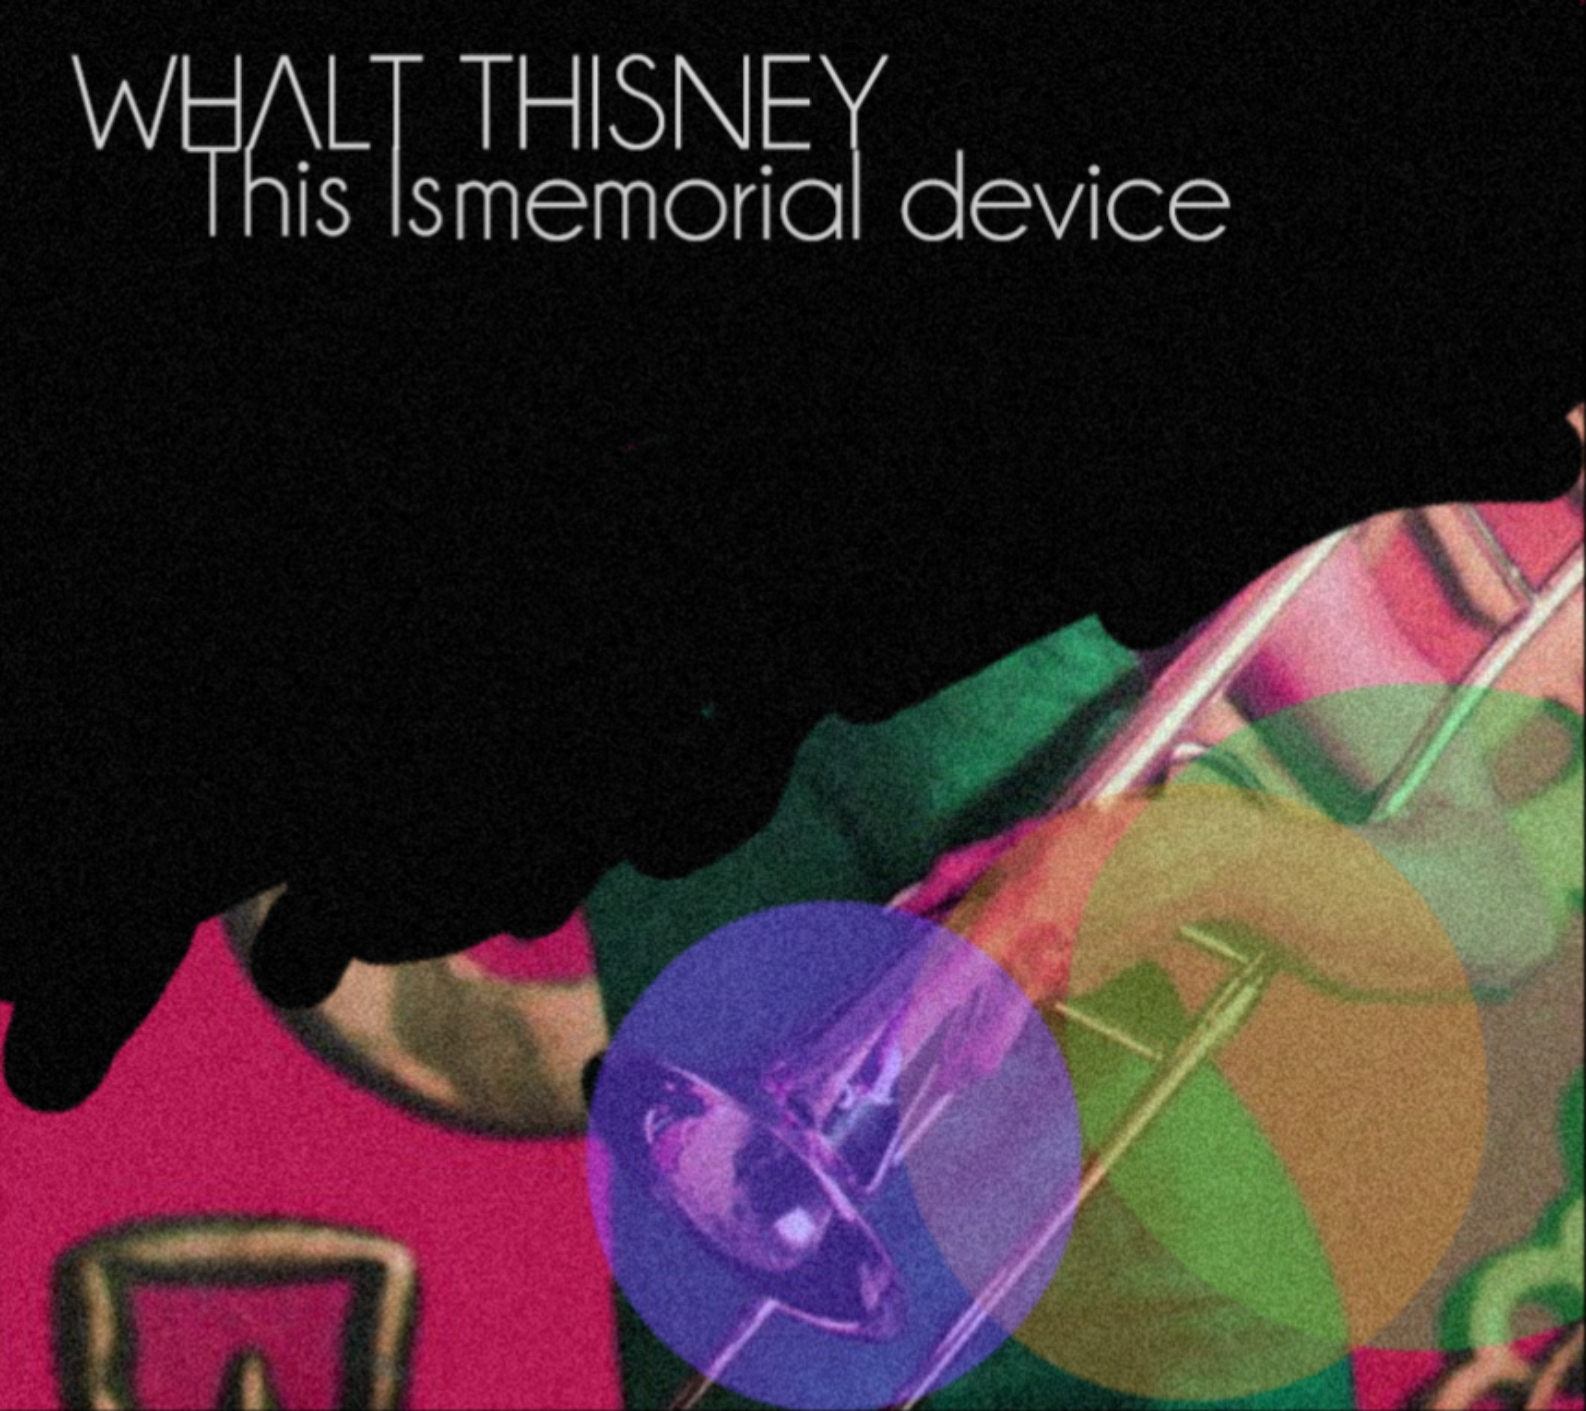 Whalt Thisney – This Is Memorial Device